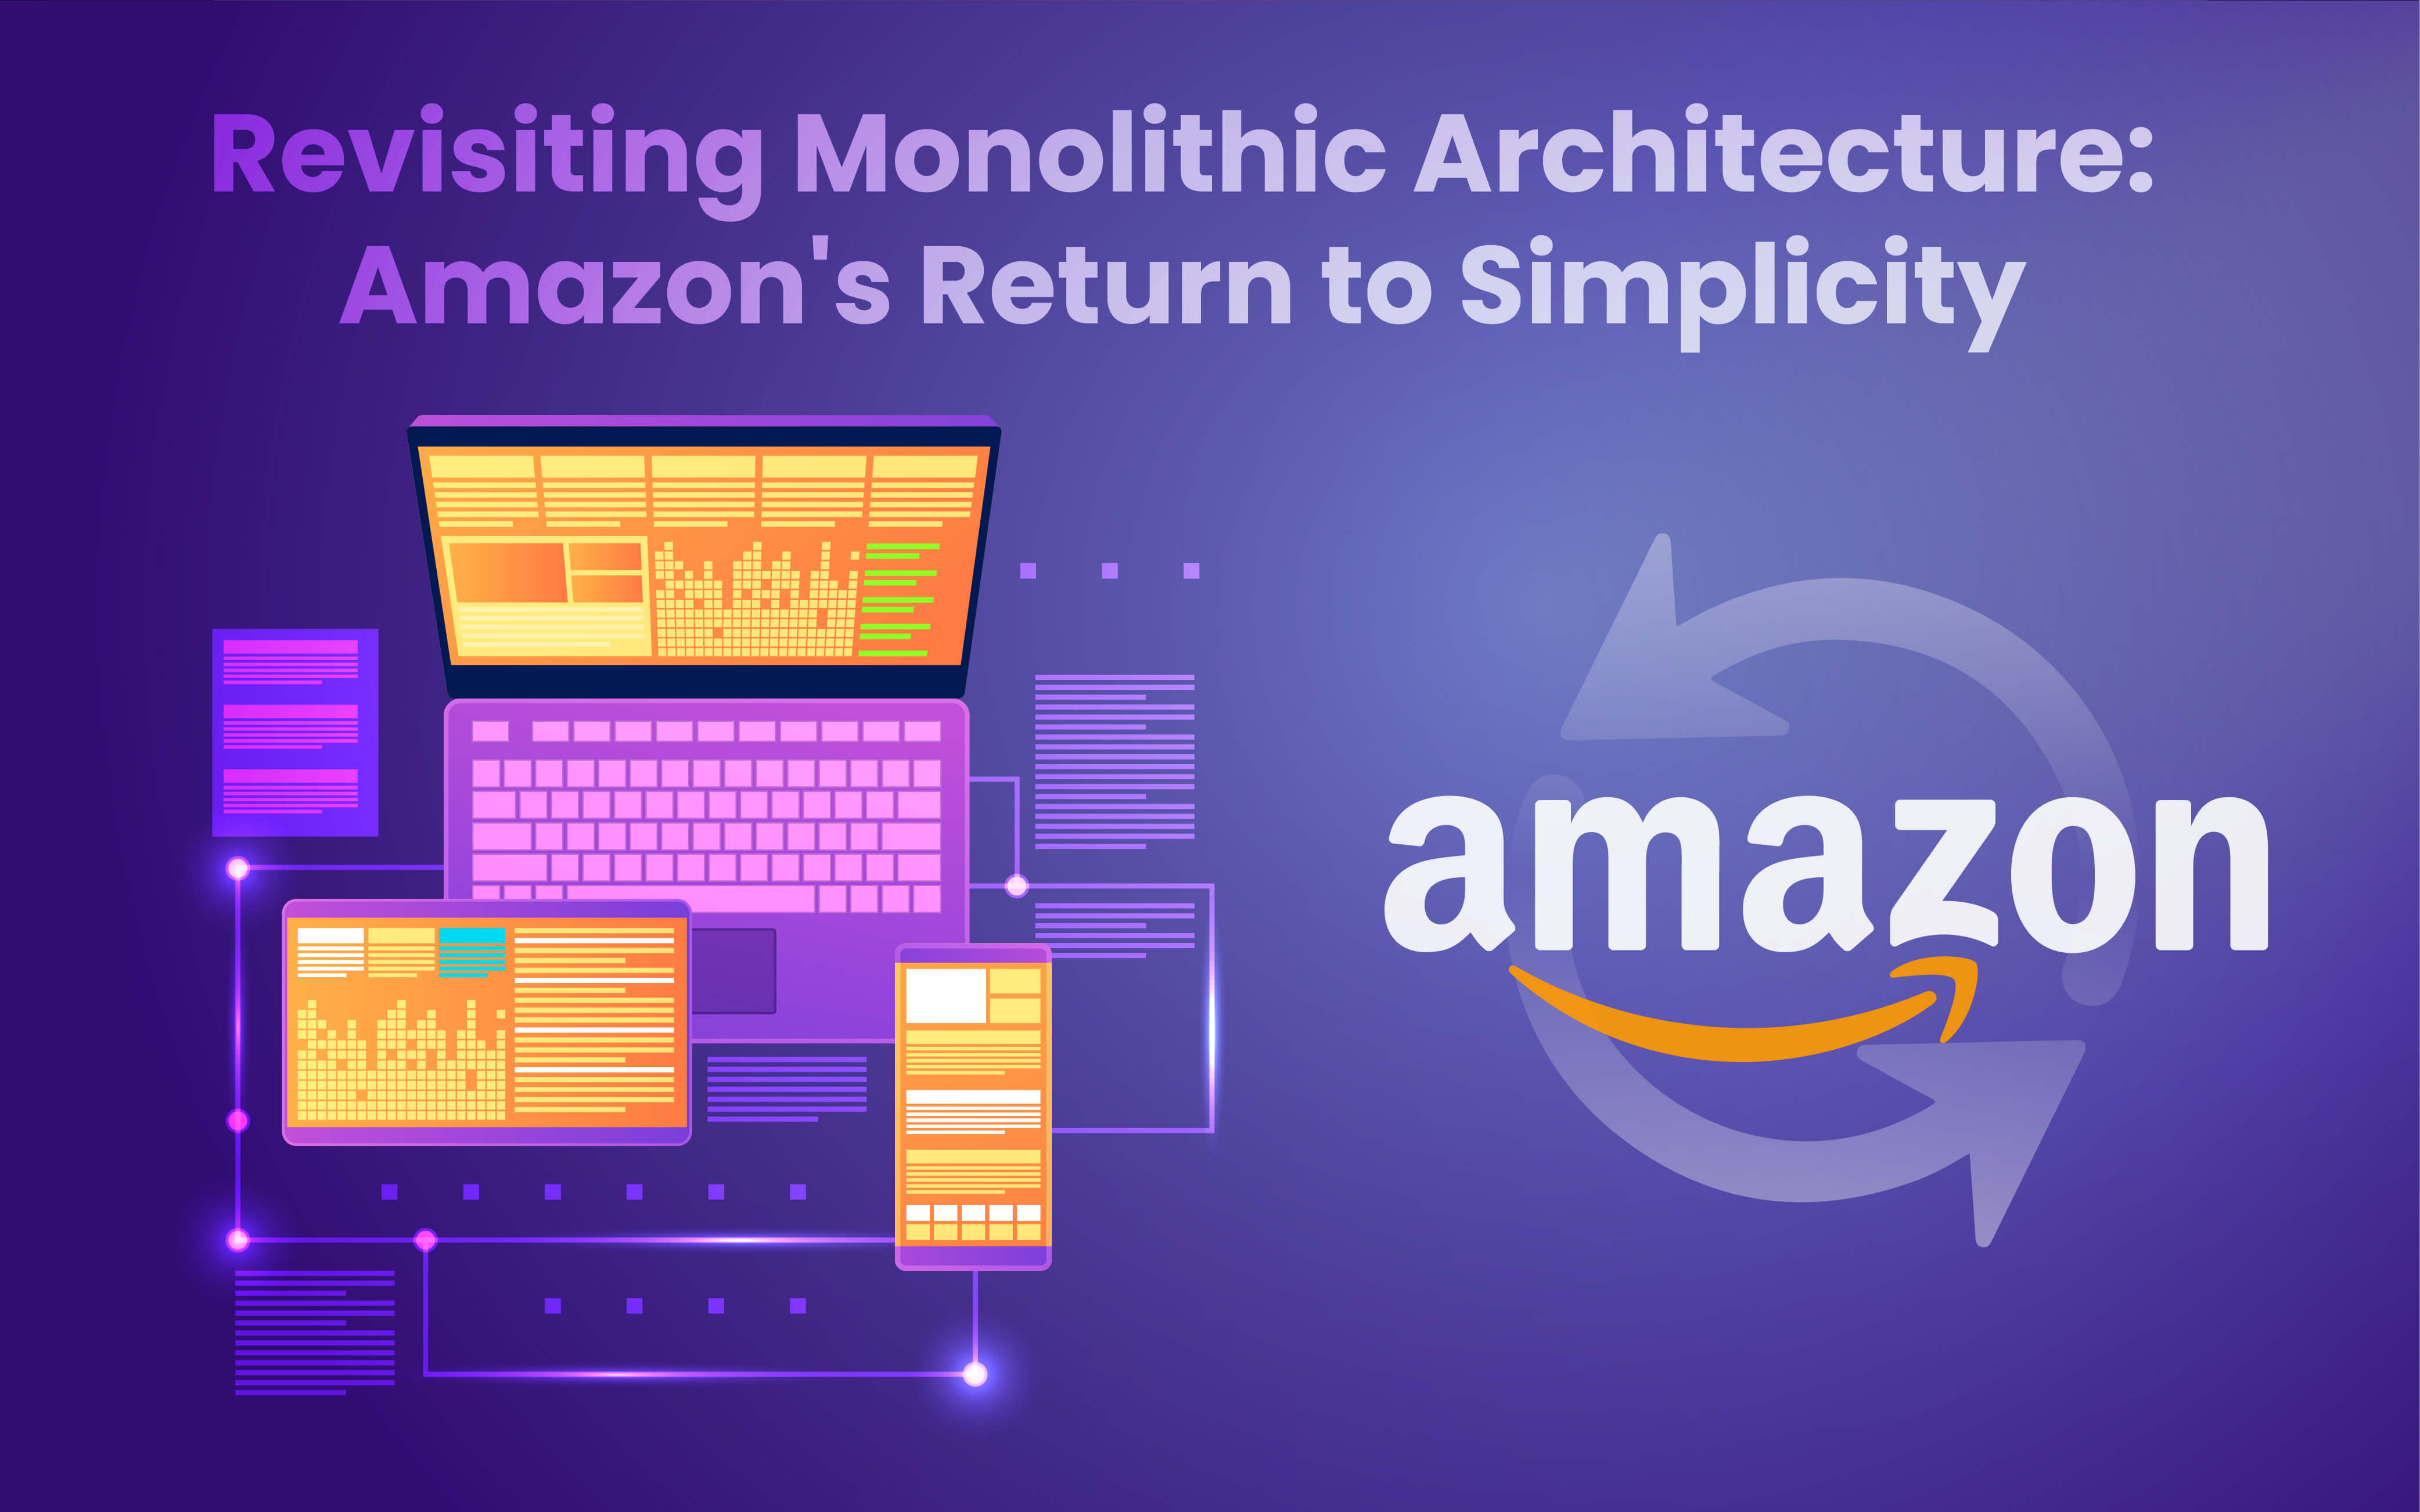 Revisiting Monolithic Architecture: Amazon’s Return to Simplicity